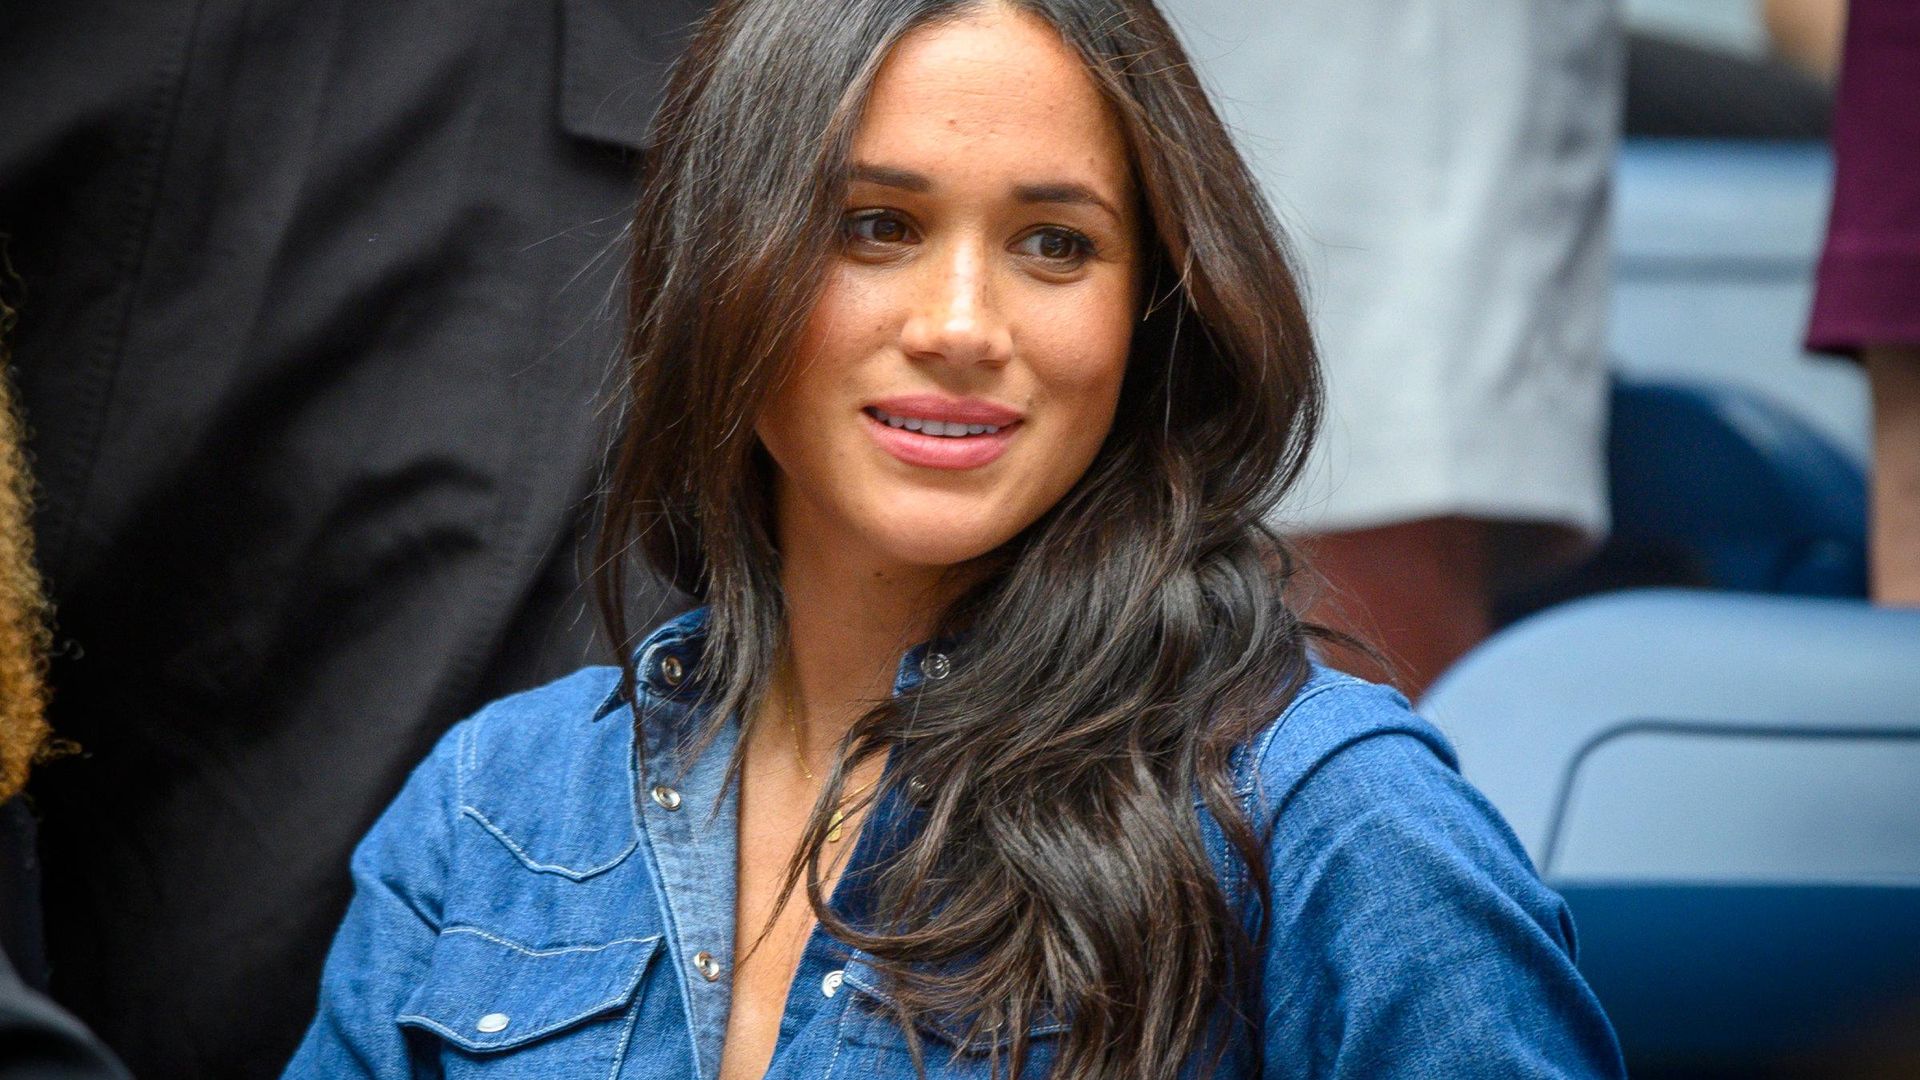 Meghan Markle rocks daisy dukes in incredible unearthed holiday photo from courtship days